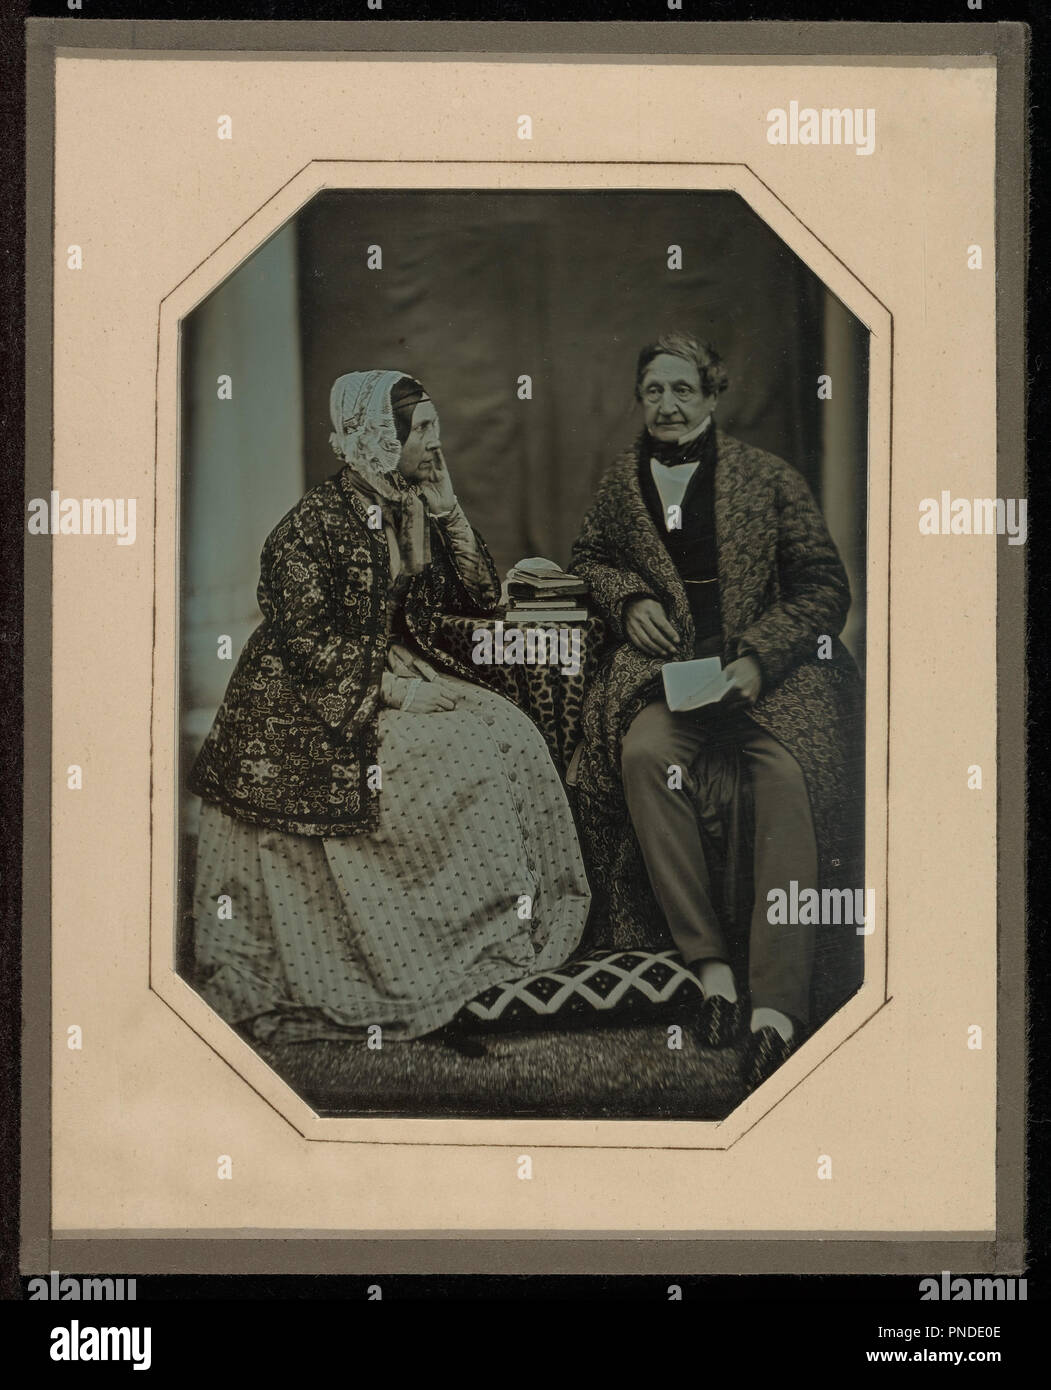 Jean-Gabriel and Anne-Charlotte-Adélaide Eynard. Date/Period: Ca. 1845. Photograph. Daguerreotype (Cased object). Stock Photo